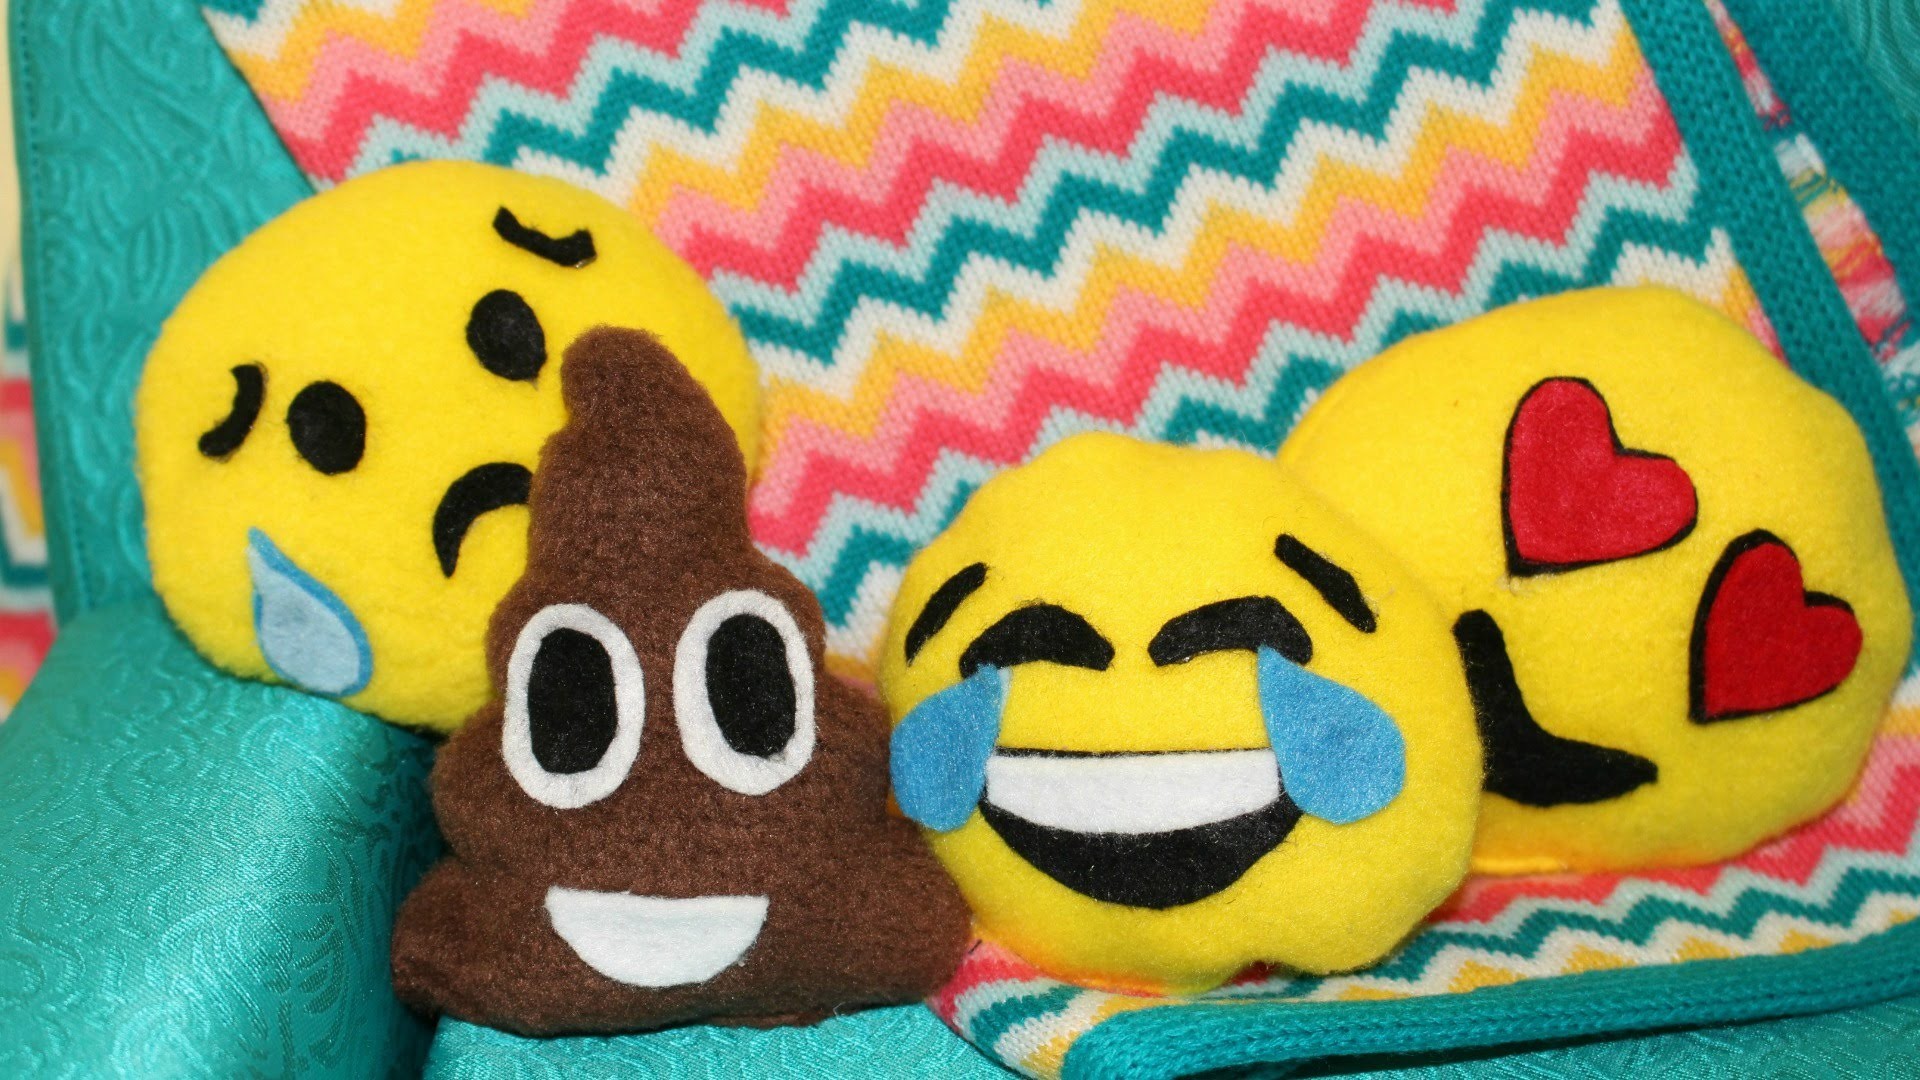 1920x1080 Learn how to make American Girl Doll Emoji Pillows. This easy doll craft  was so much fun to make. We love Emoji pillows and wanted make some Emoji  doll ...